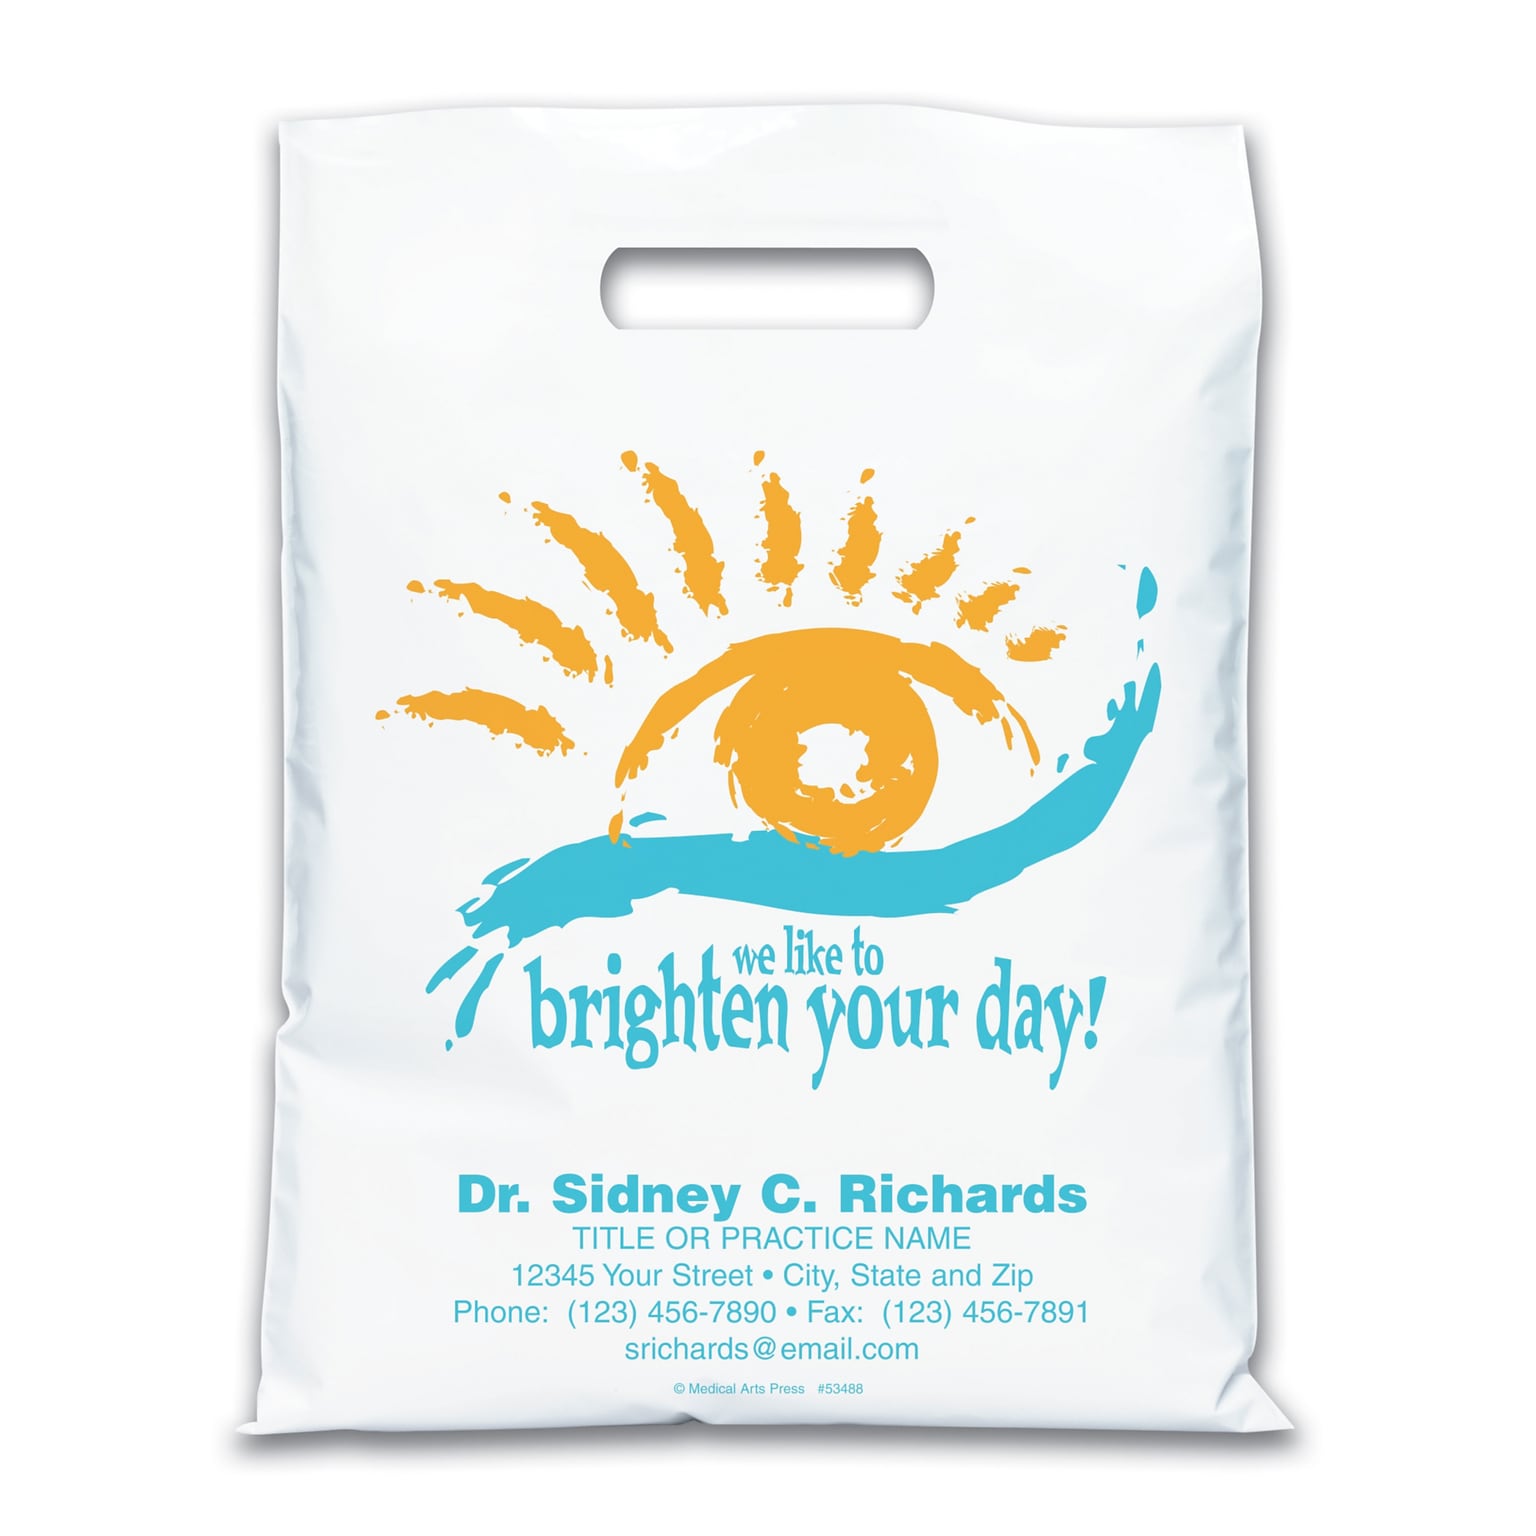 Medical Arts Press® Eye Care Personalized Large 2-Color Supply Bags; 9 x 13, Brighten Your Day, 100 Bags, (53488)